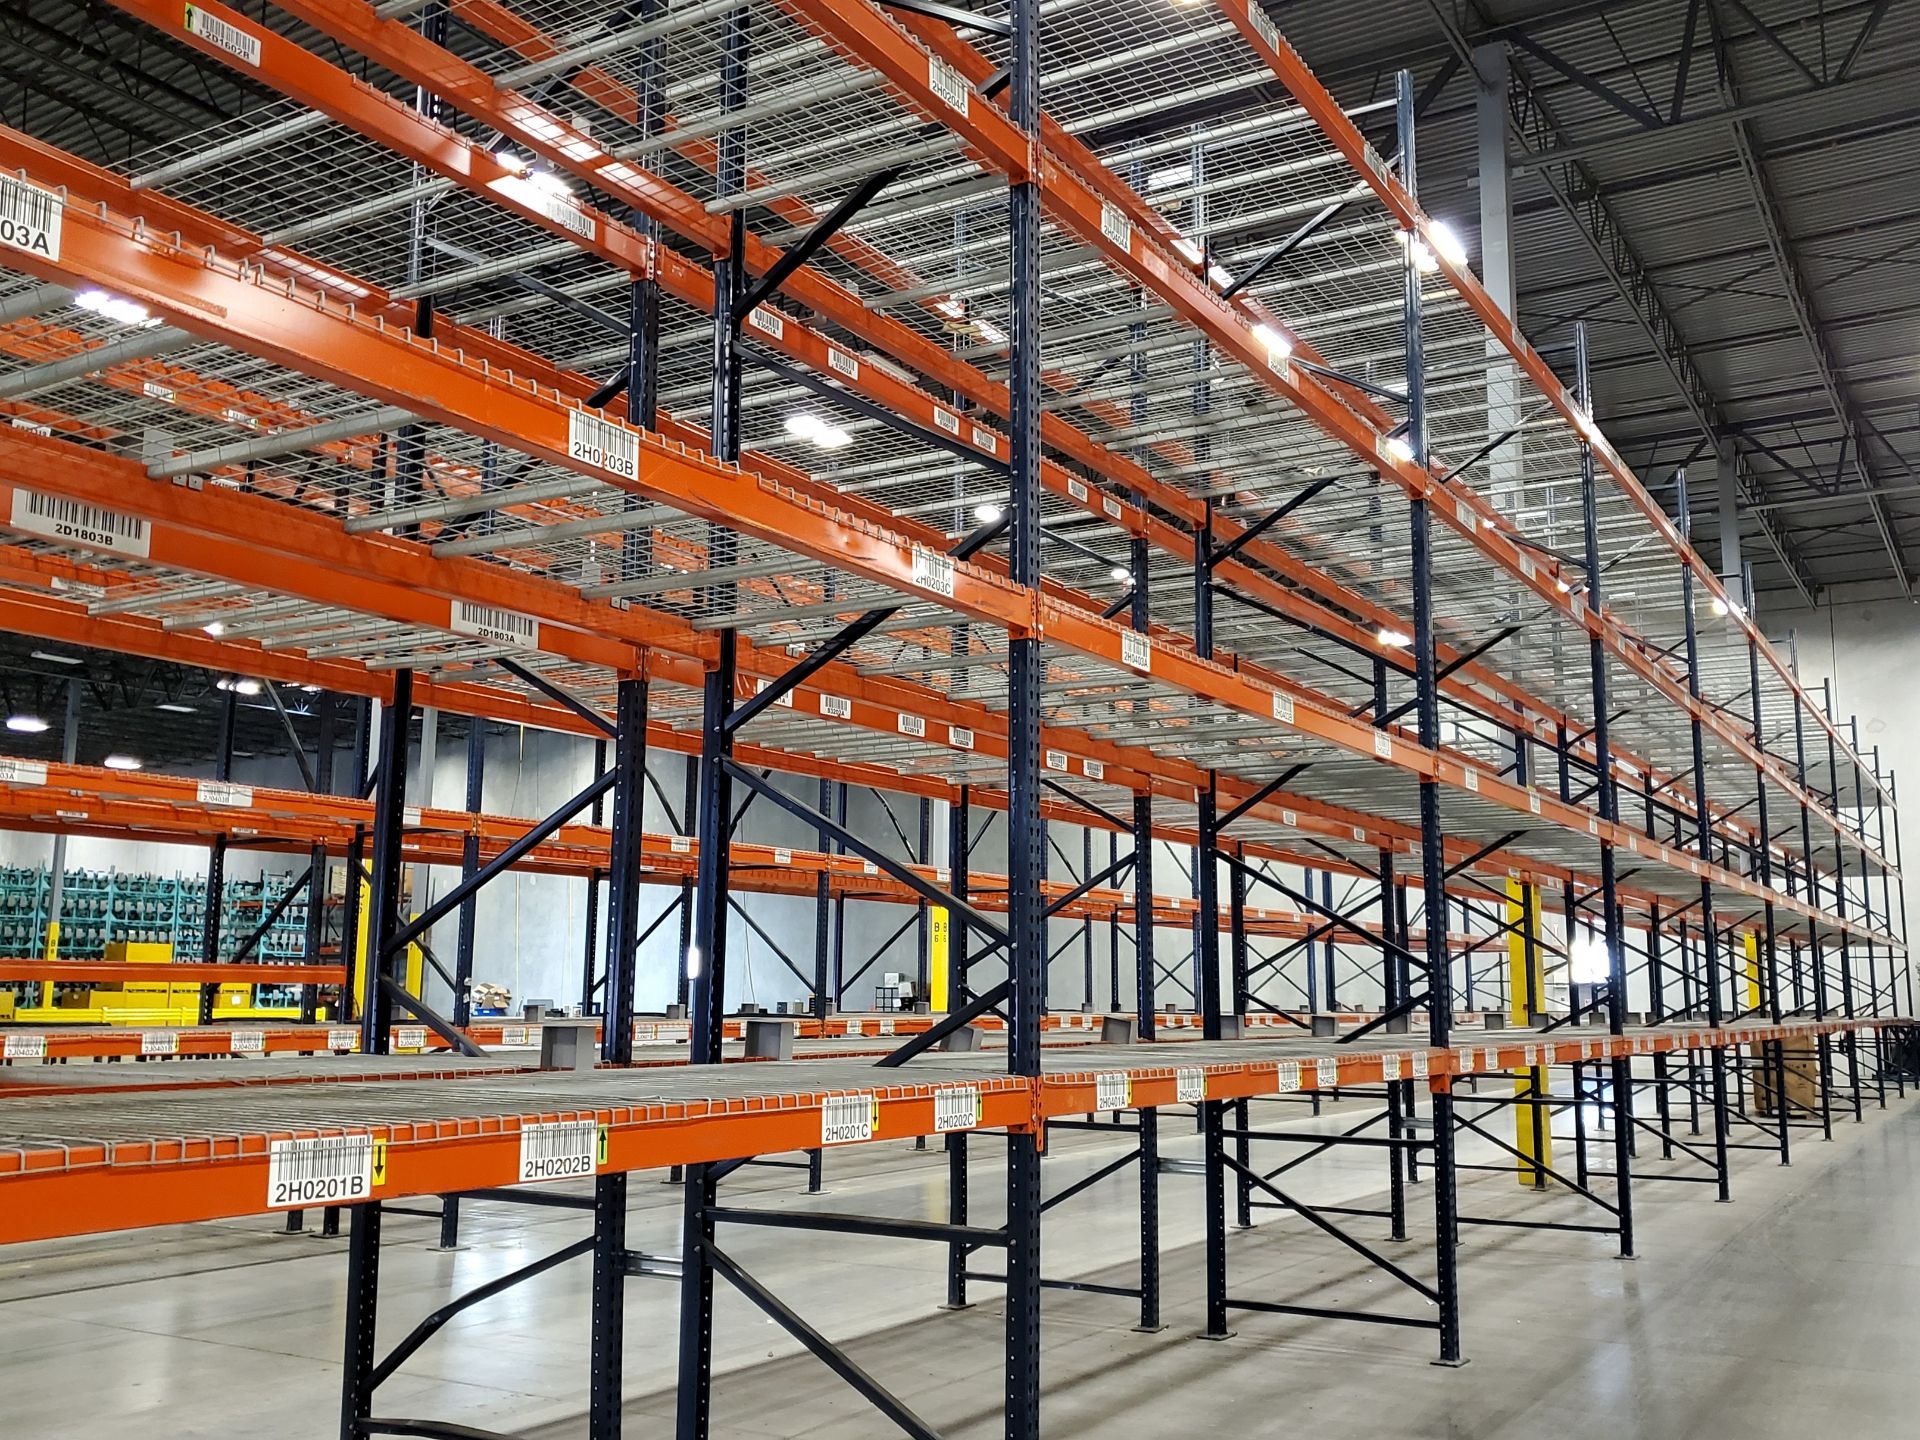 (20) BAYS OF MECALUX TEAR DROP PALLET RACKING, (22) 21' X 48’‘ UPRIGHTS, (158) 13' X 4-3/4" - 6.5" - Image 6 of 6